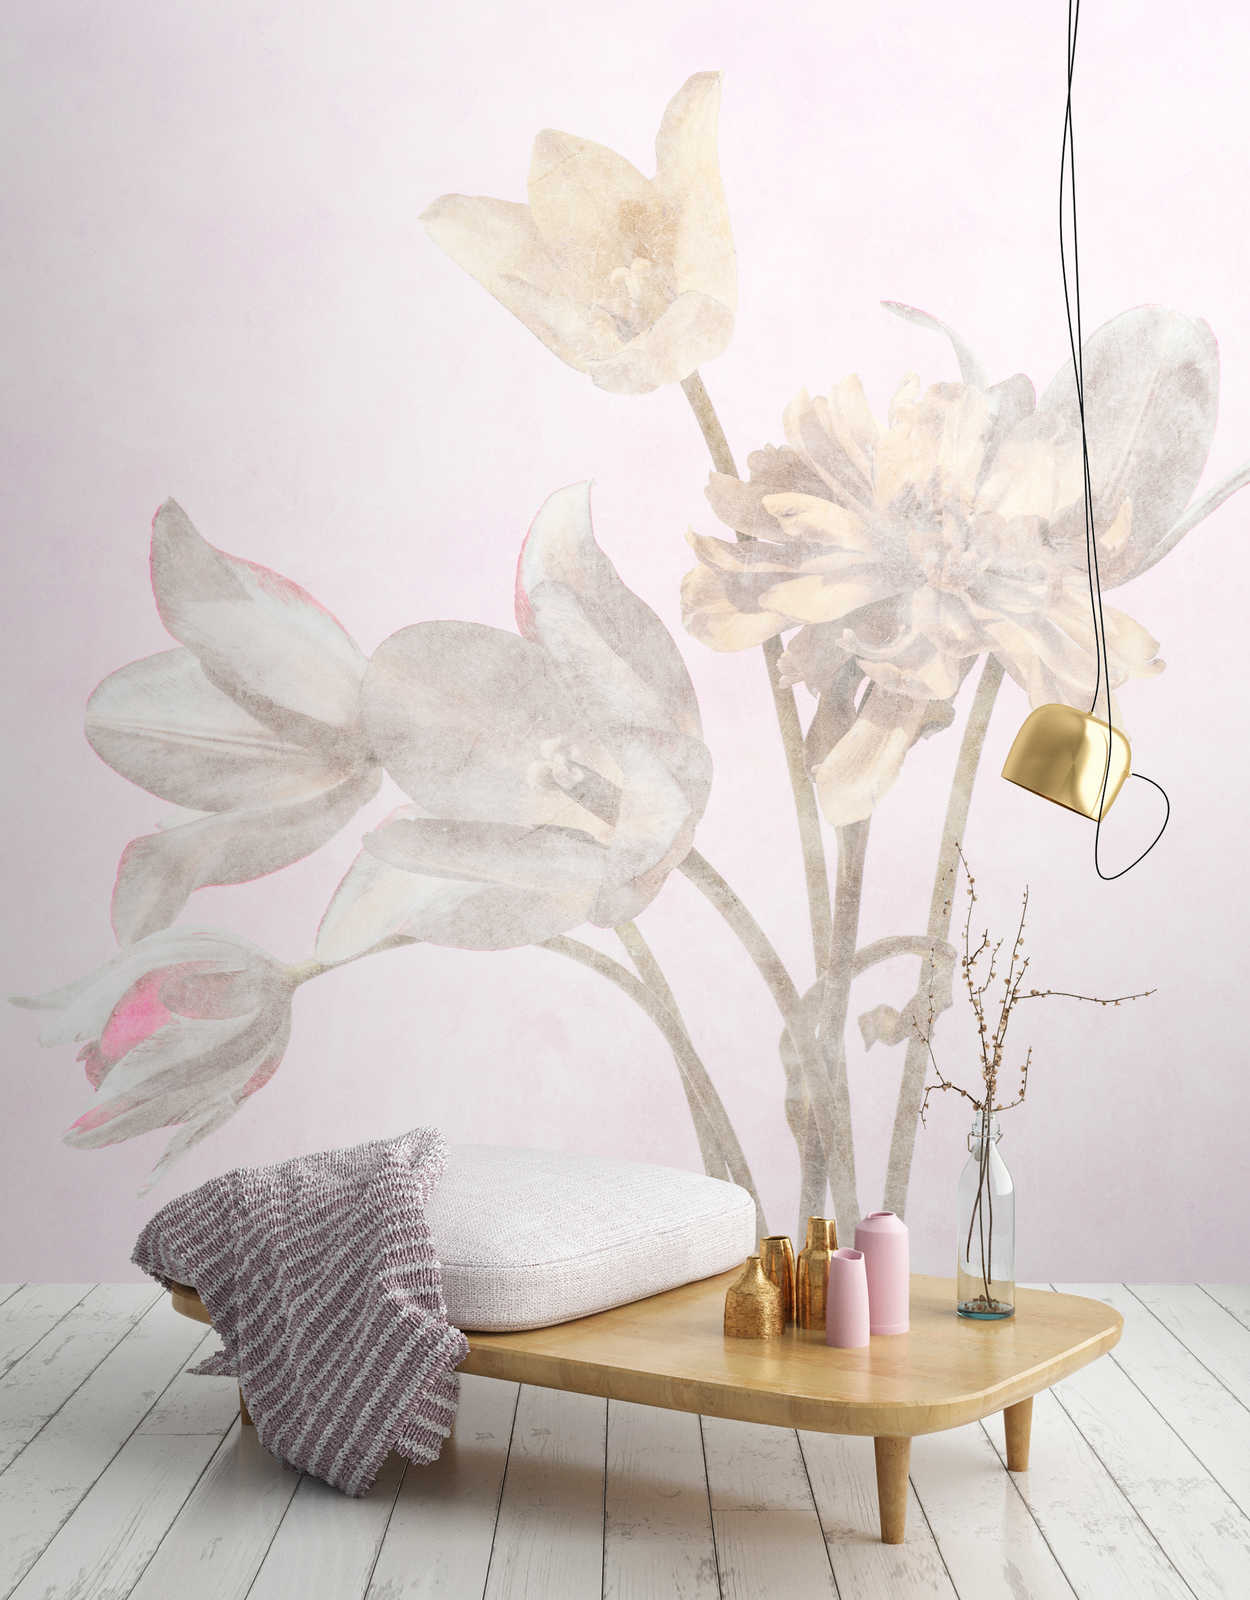             Morning Room 1 - flowers mural bloomed in faded style
        